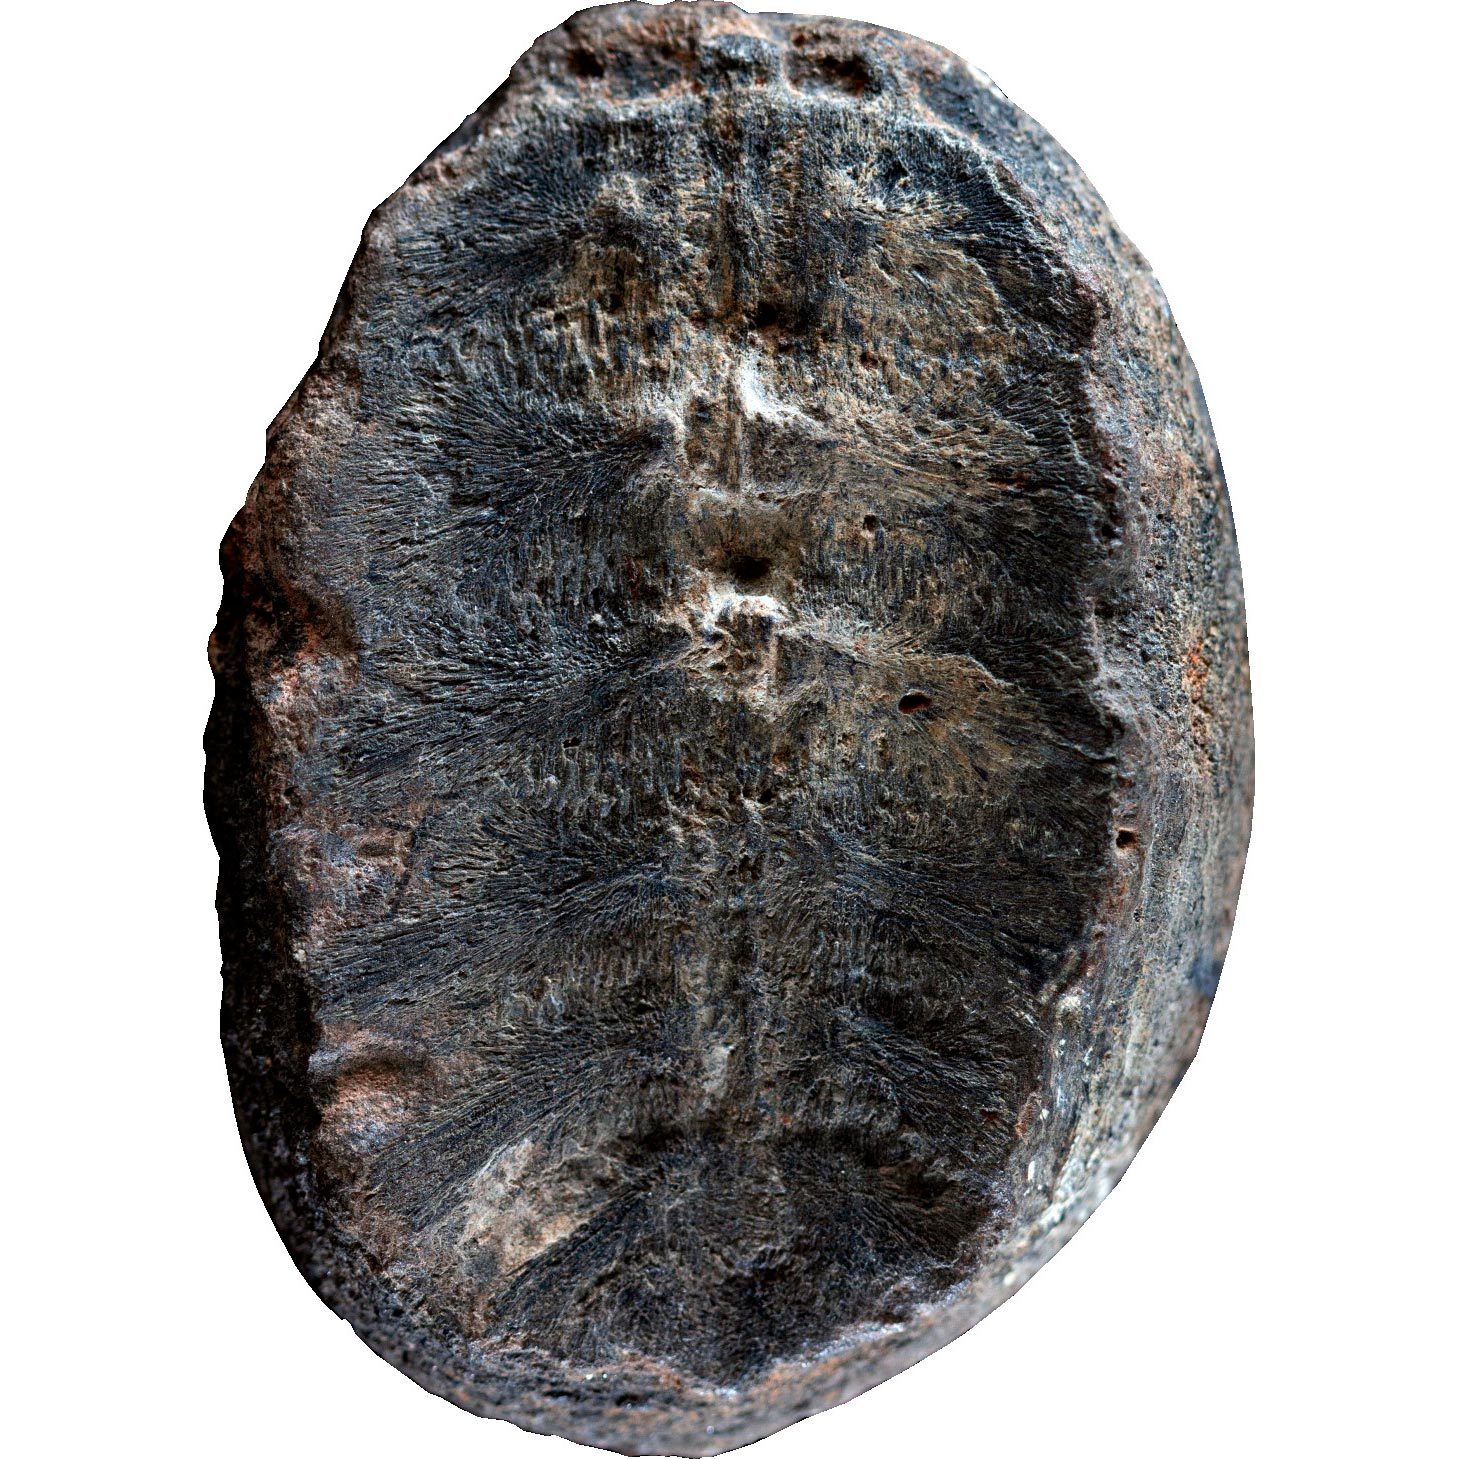 Uncovering a baby turtle disguised as a plant fossil